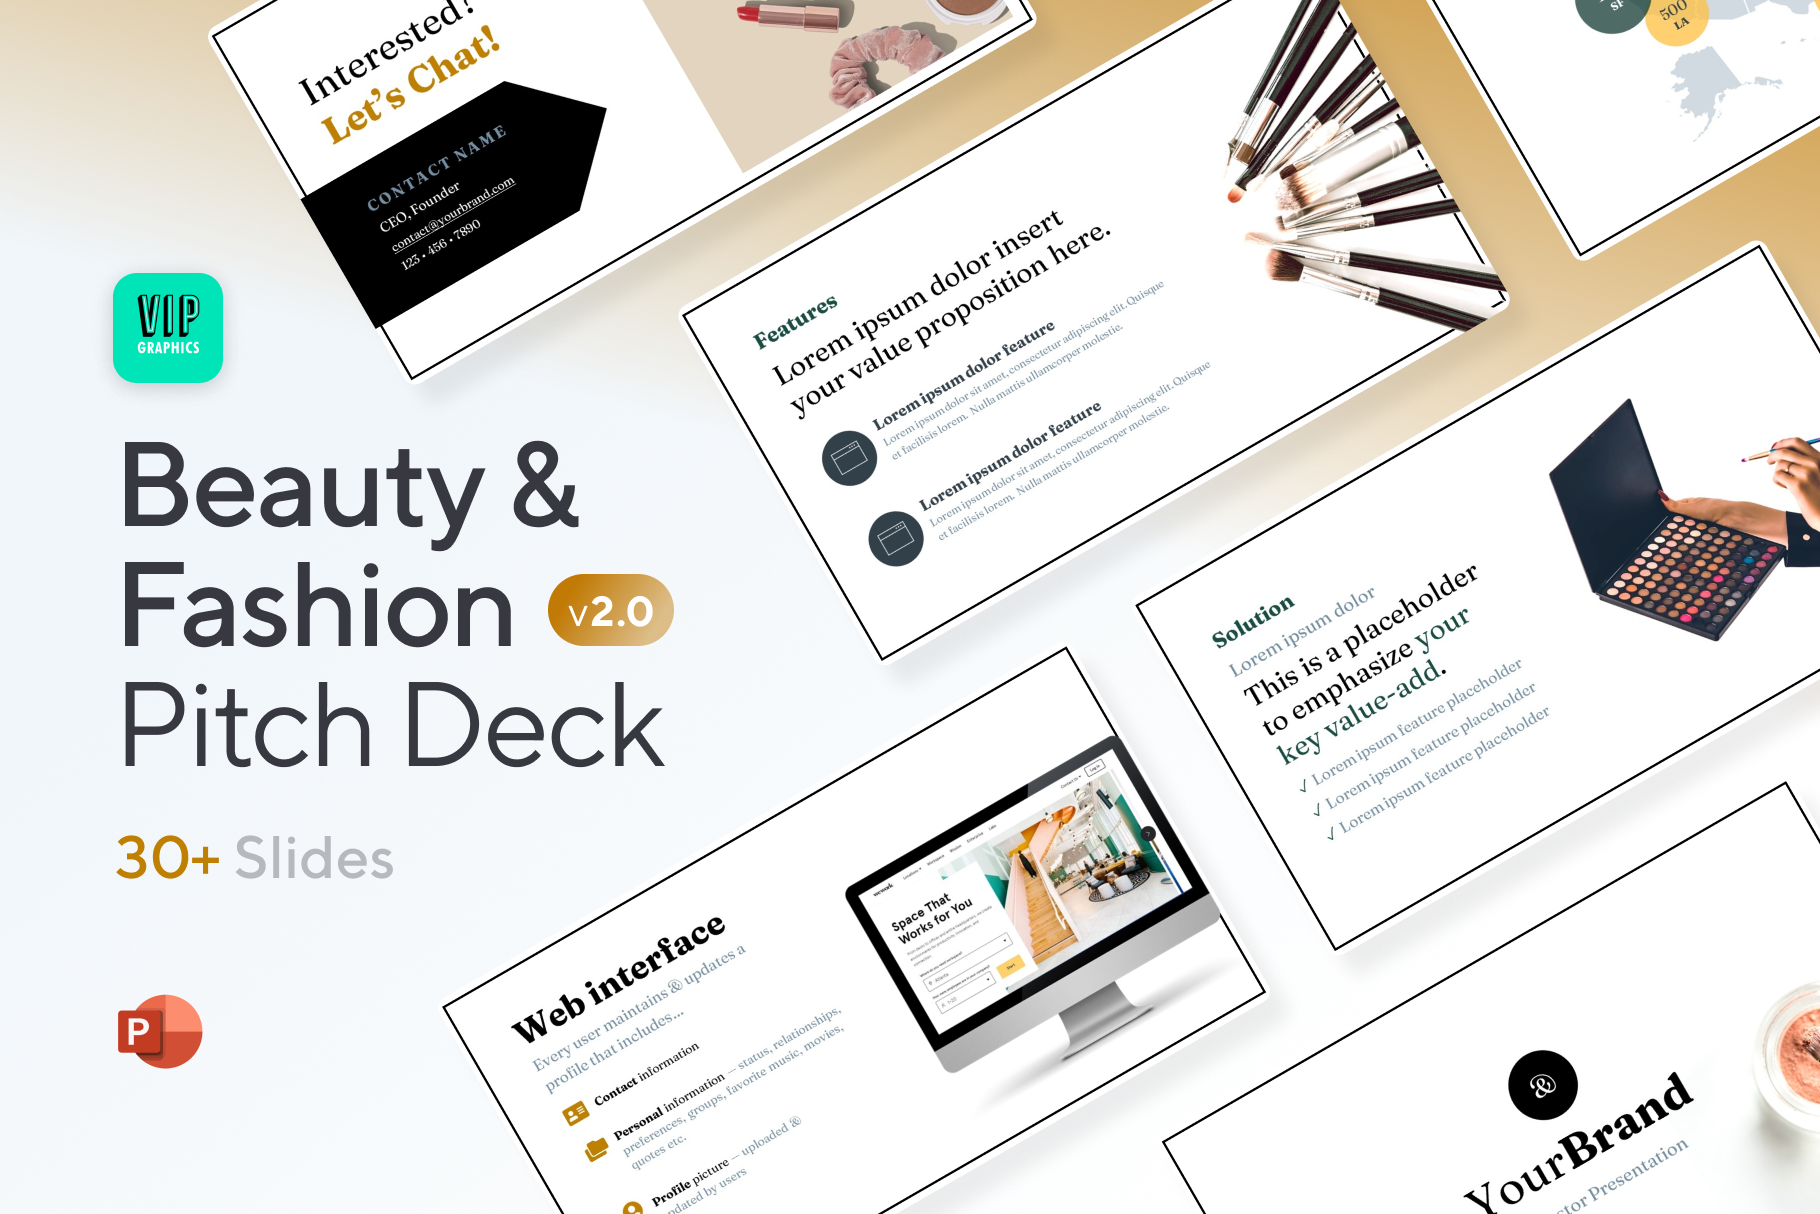 Beauty Pitch Deck Template - Investor Presentation for beauty startups | VIP Graphics